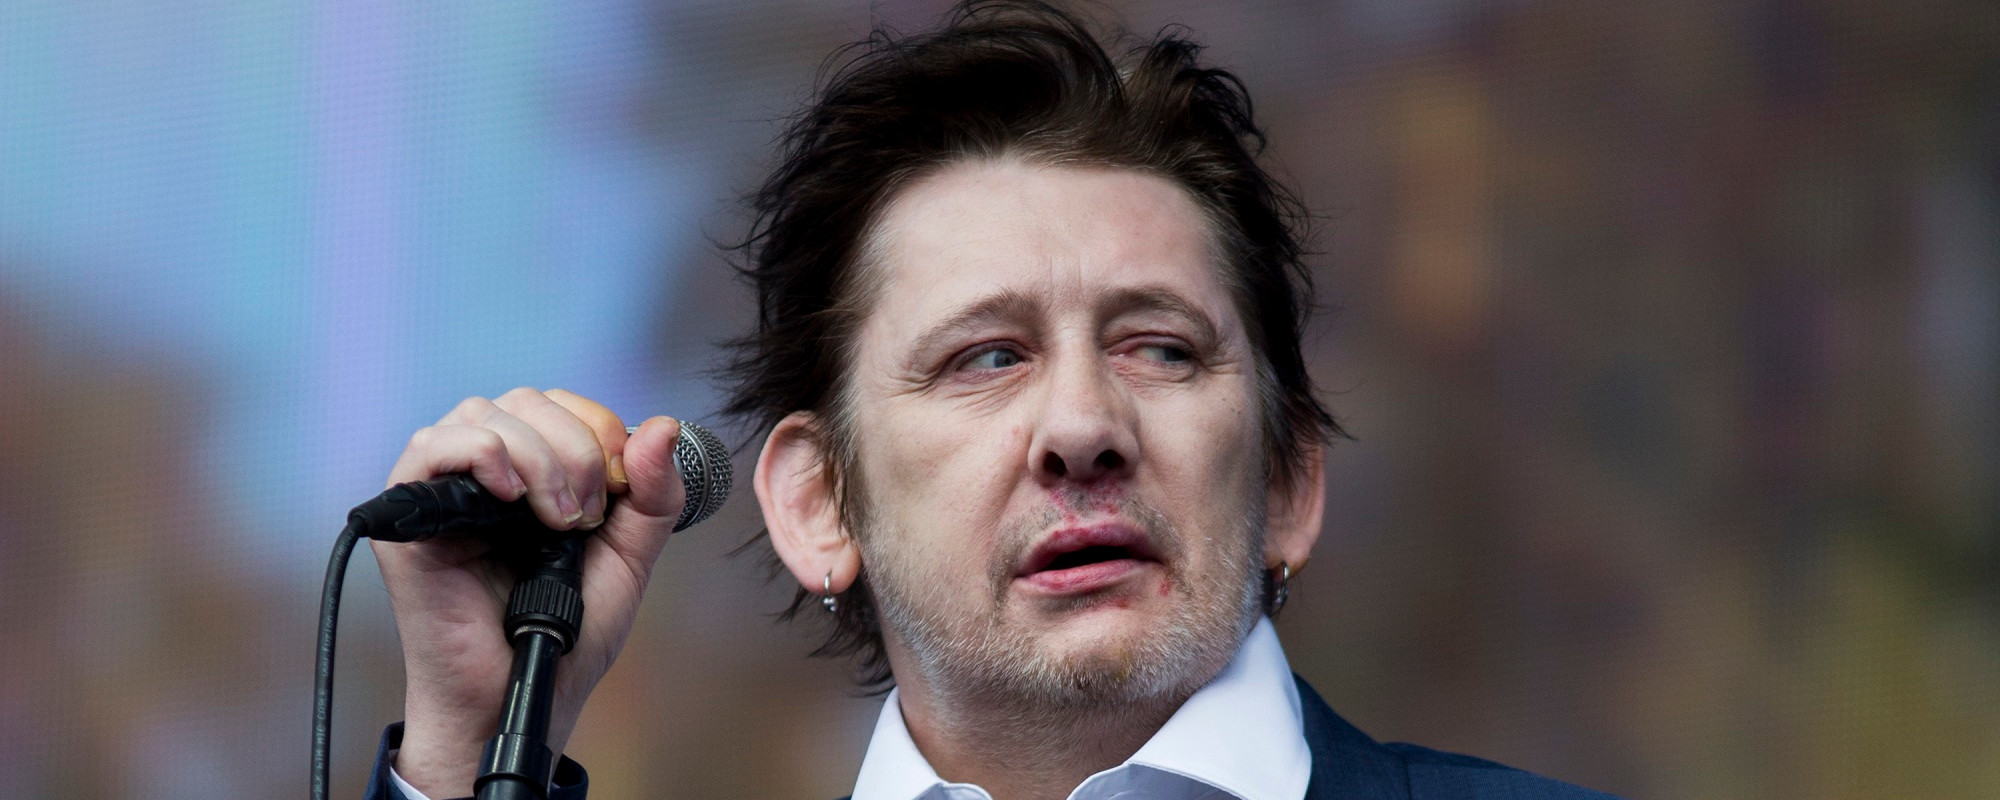 U2, Flea, and More Musicians Pay Homage to Late Pogues Frontman Shane MacGowan